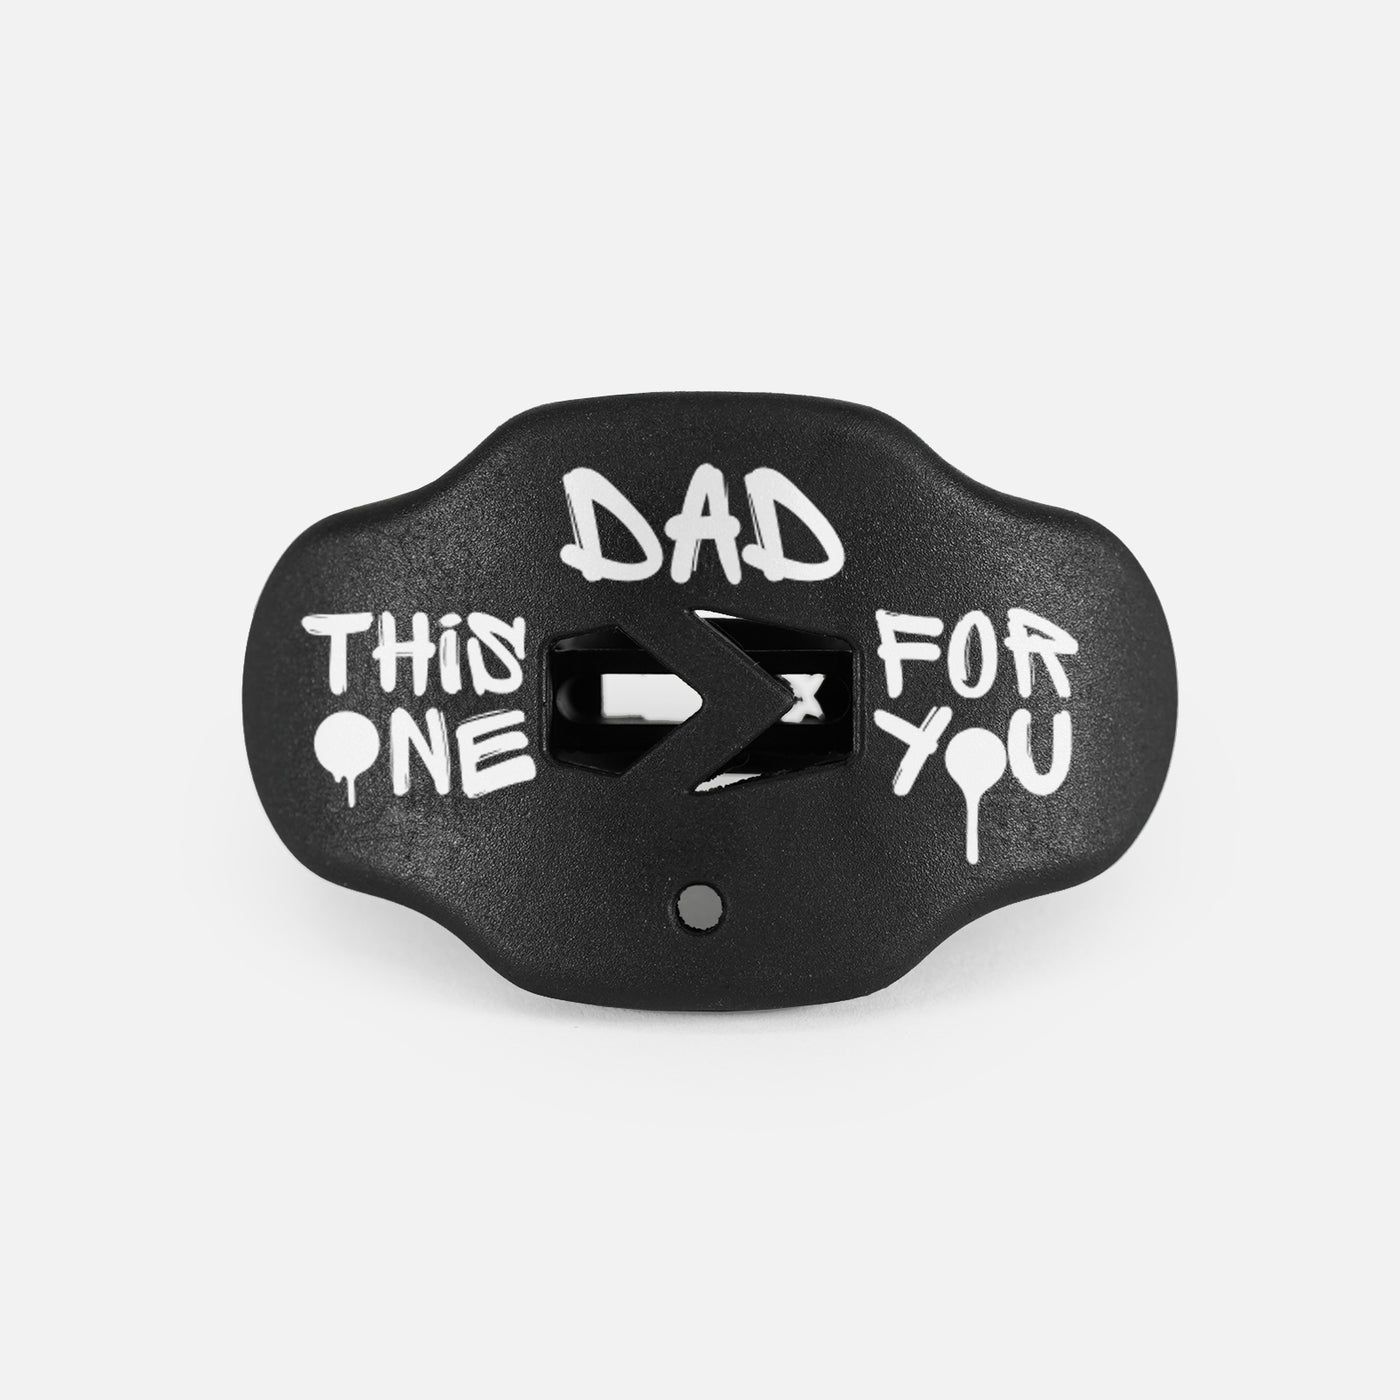 Dad This One for You Black Kids Football Mouthguard